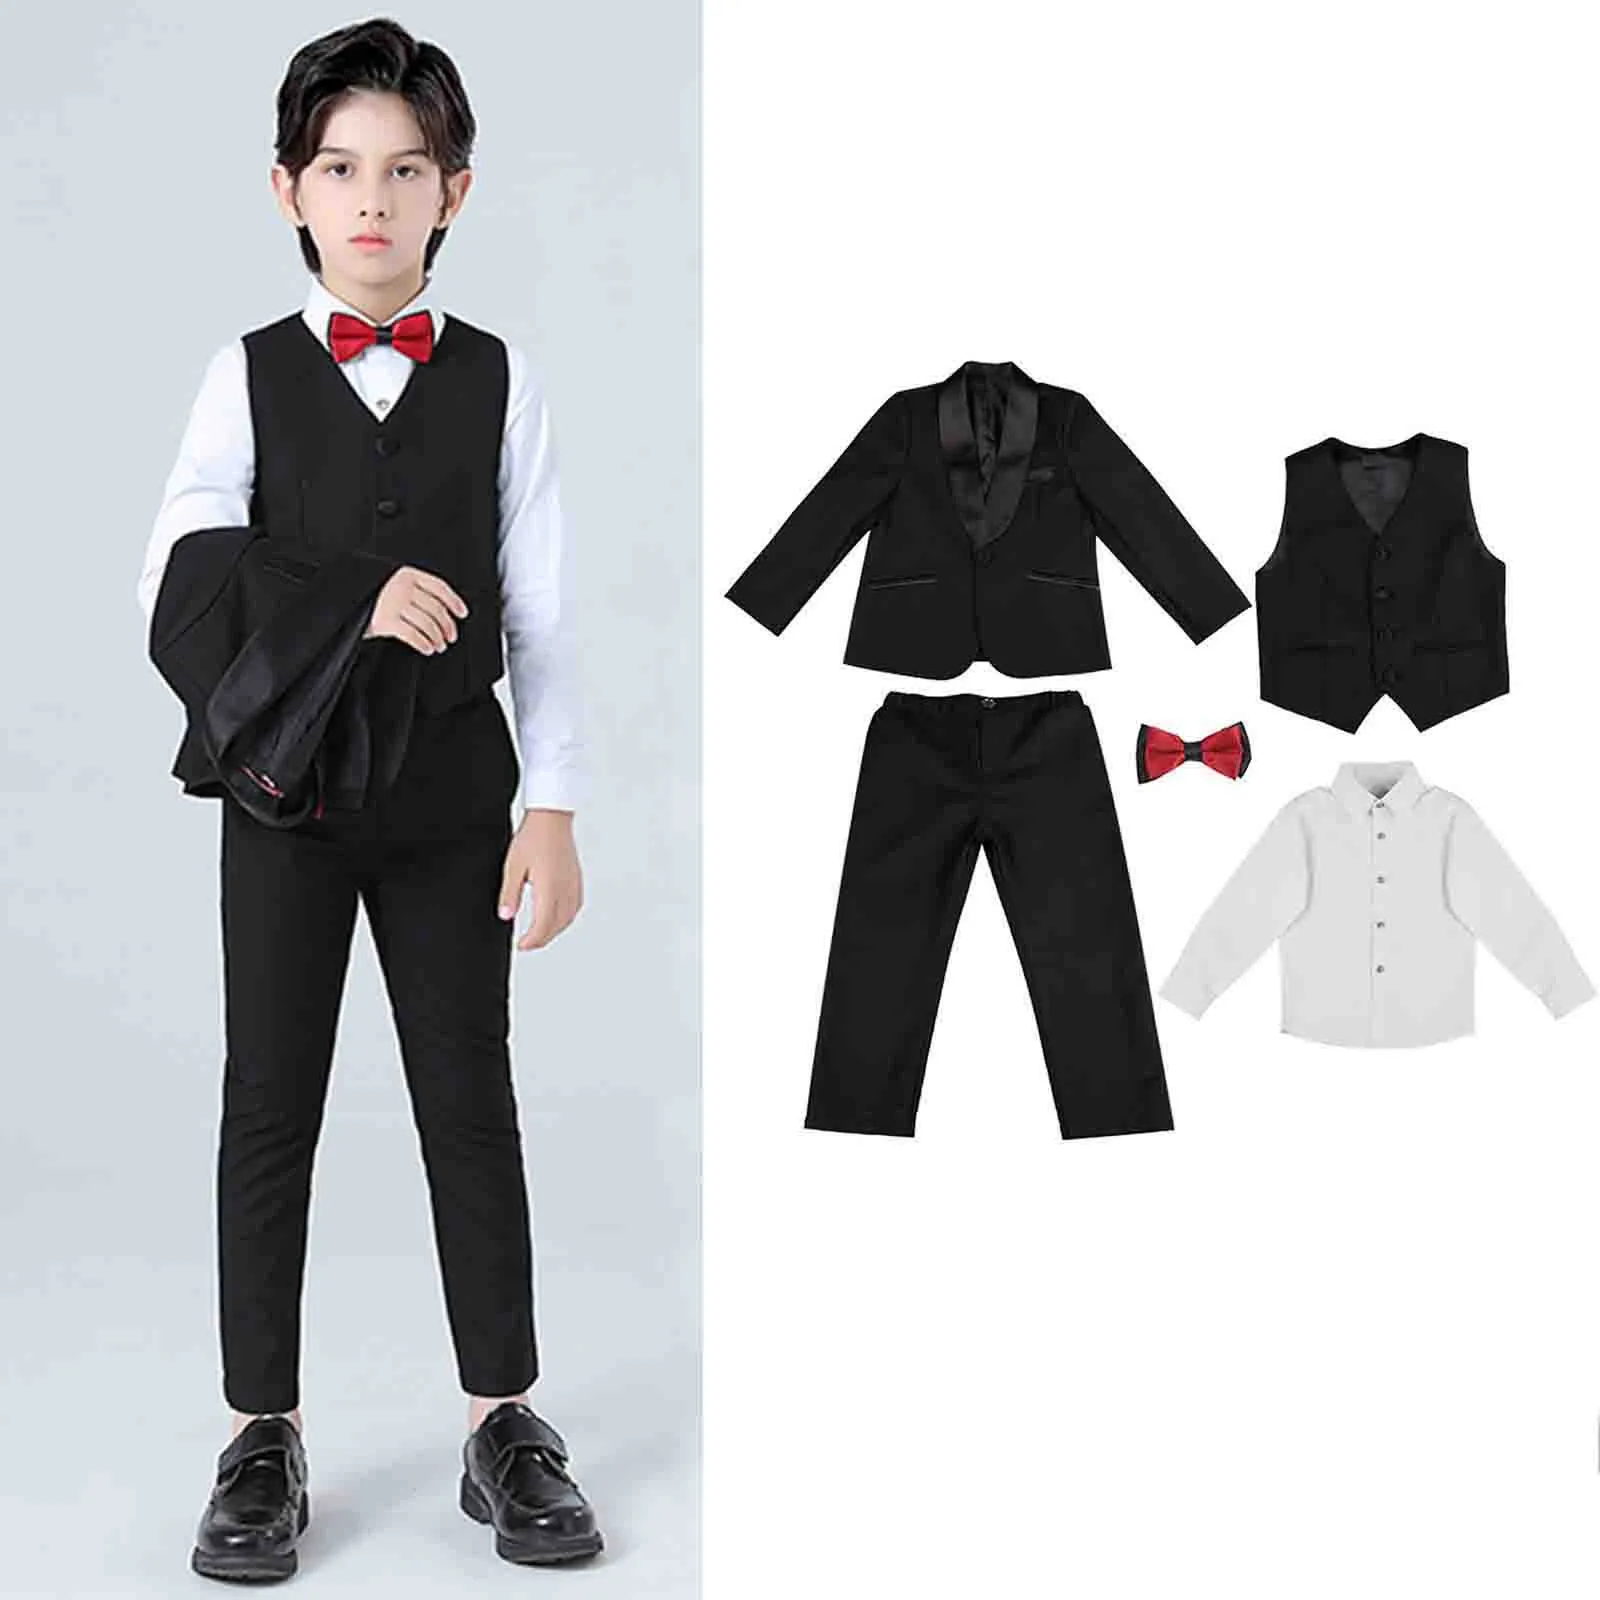 

Kids Toddler Boys Formal Suits Spring Autumn Long Sleeve Shirt Pants Coat Vest Solid 5PC Outfits Blazer Sets Boys 1-10 Years